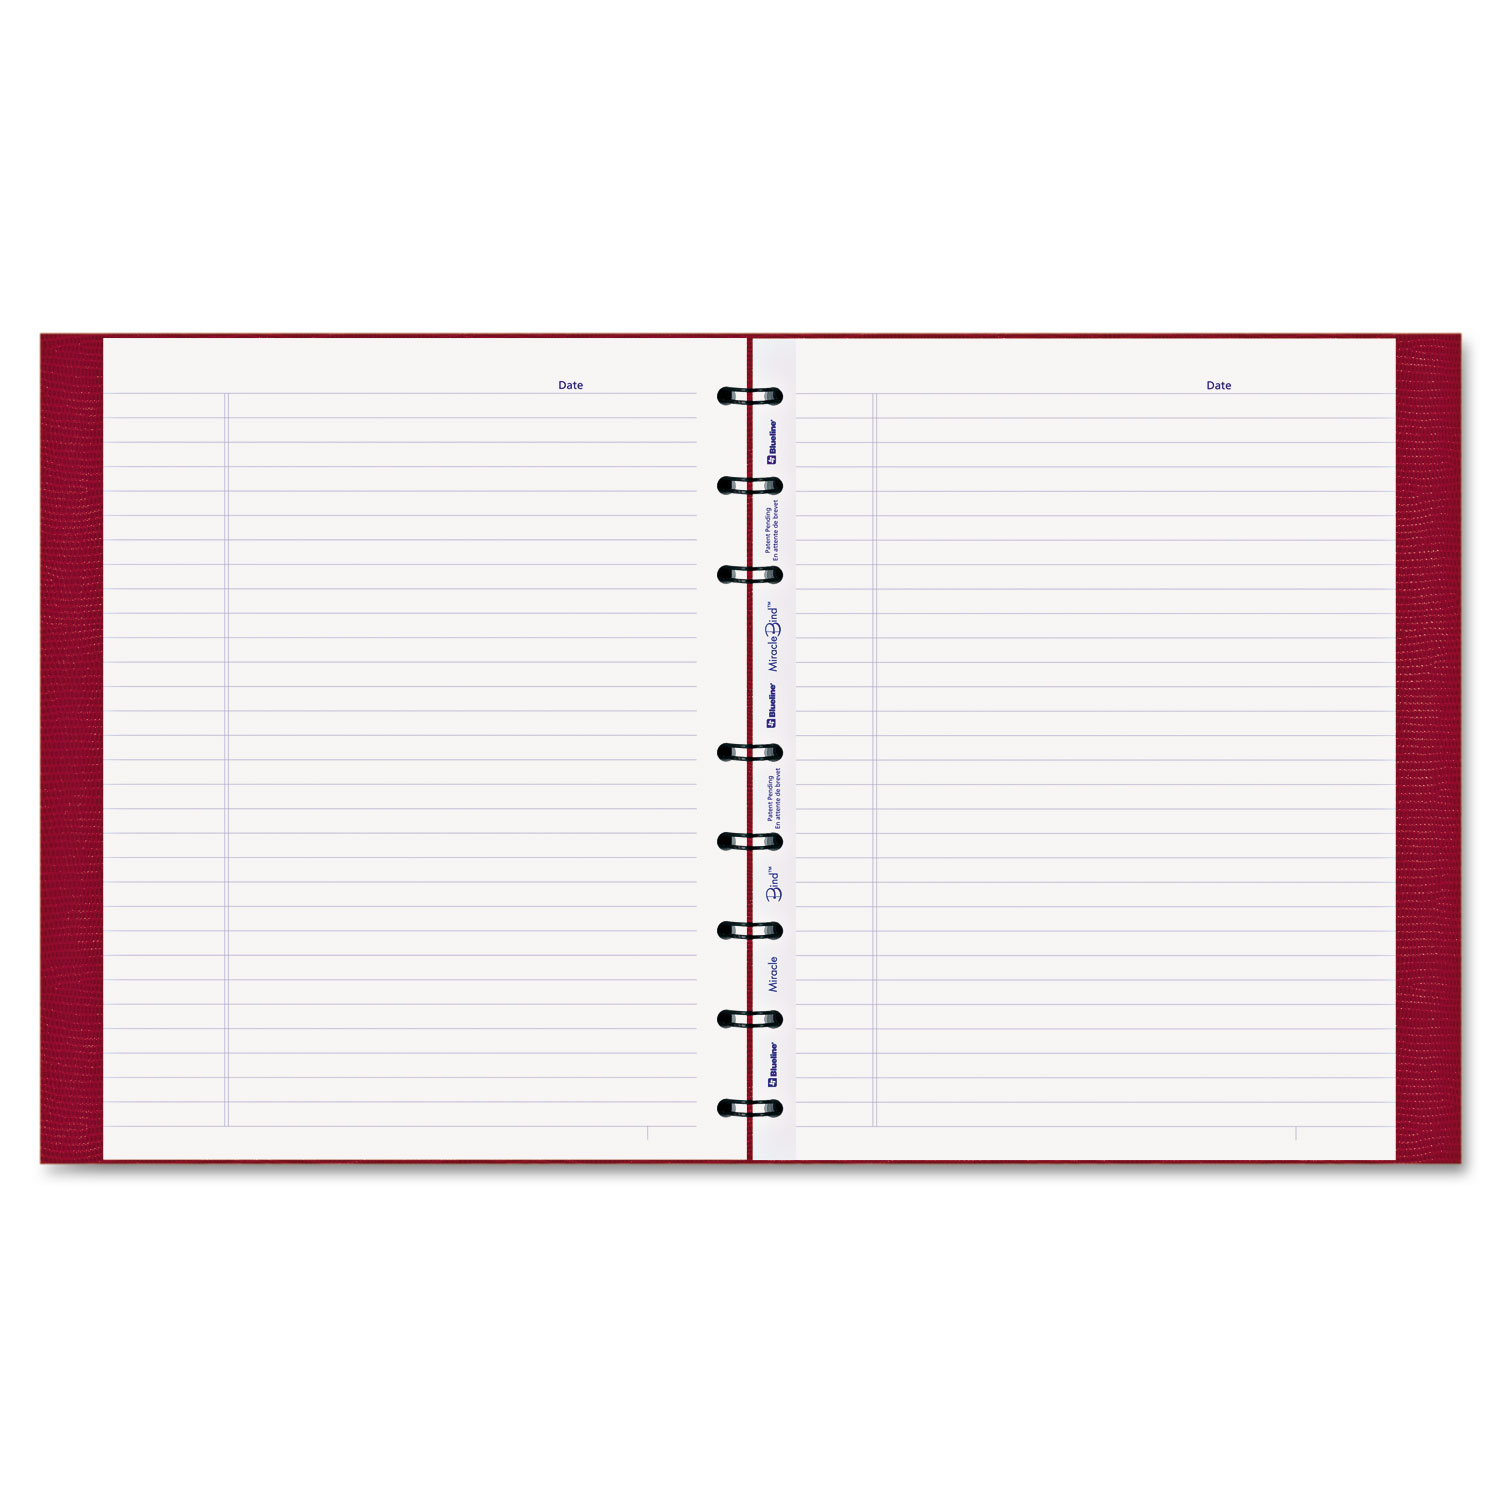  Blueline AF9150.83 MiracleBind Notebook, 1 Subject, Medium/College Rule, Red Cover, 9.25 x 7.25, 75 Sheets (REDAF915083) 